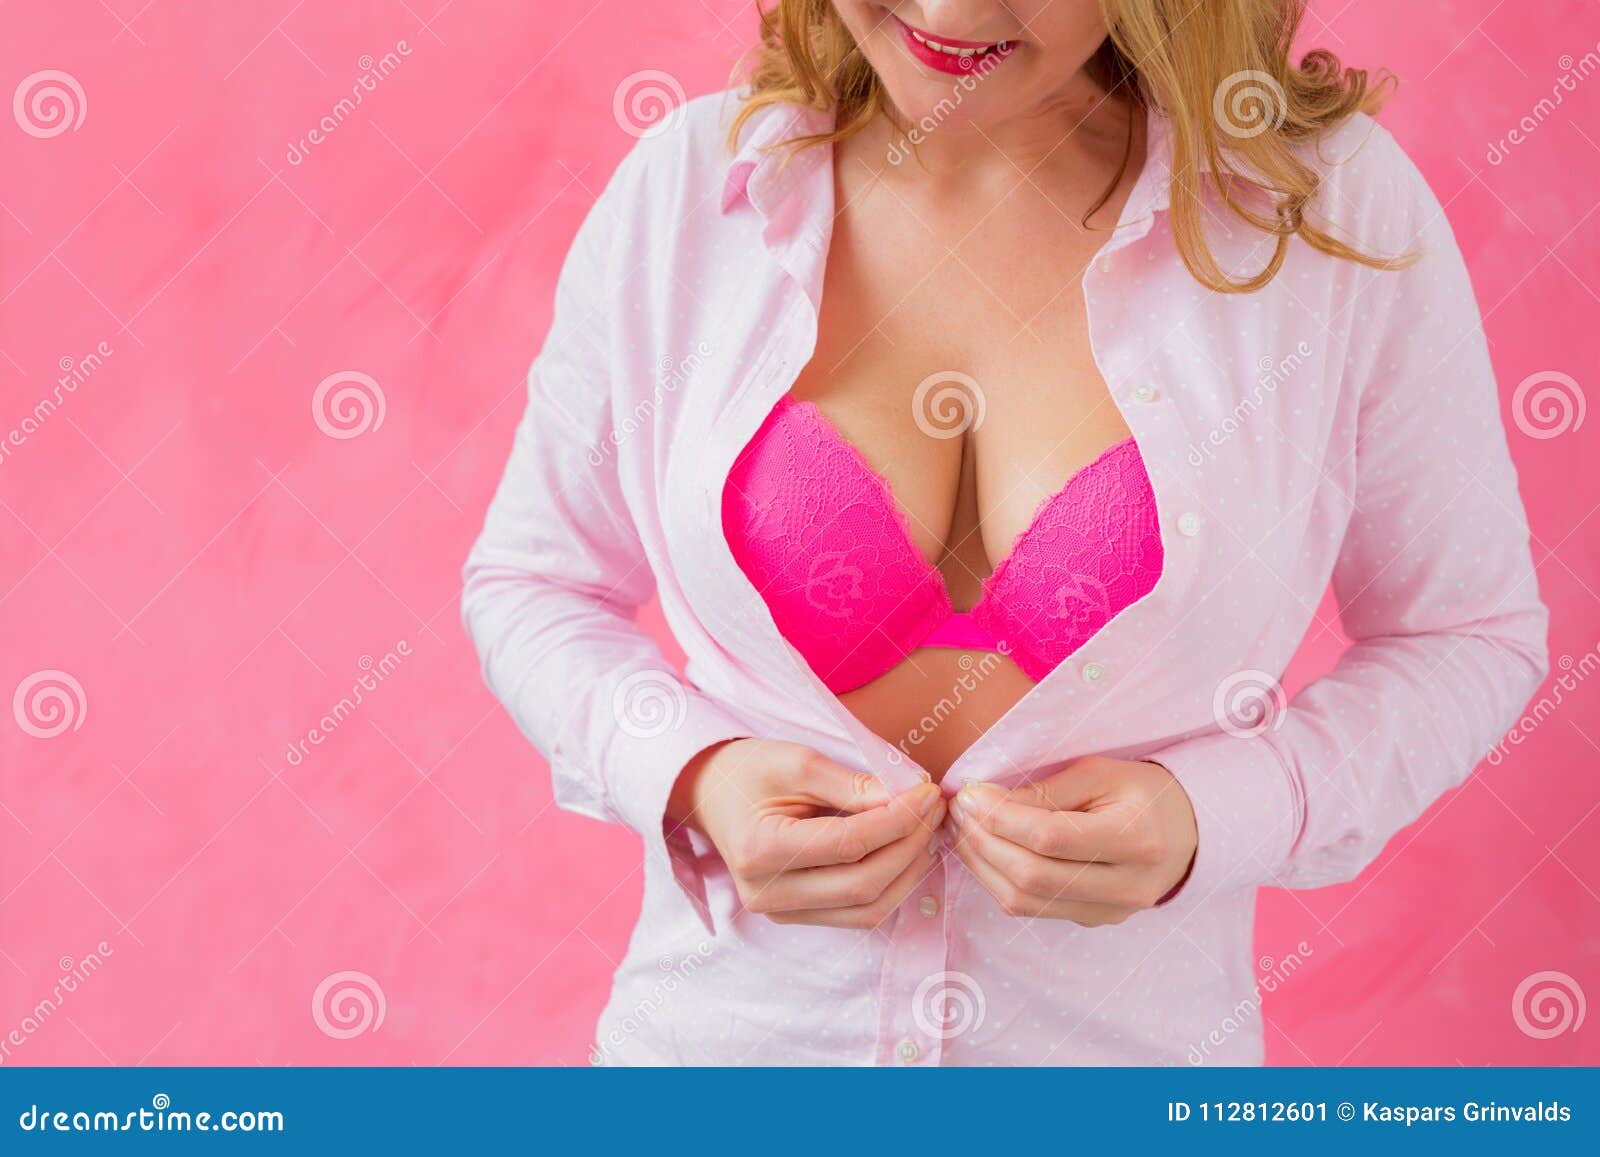 Woman With Unbuttoned Shirt Stock Image Image Of Girl Ready 112812601